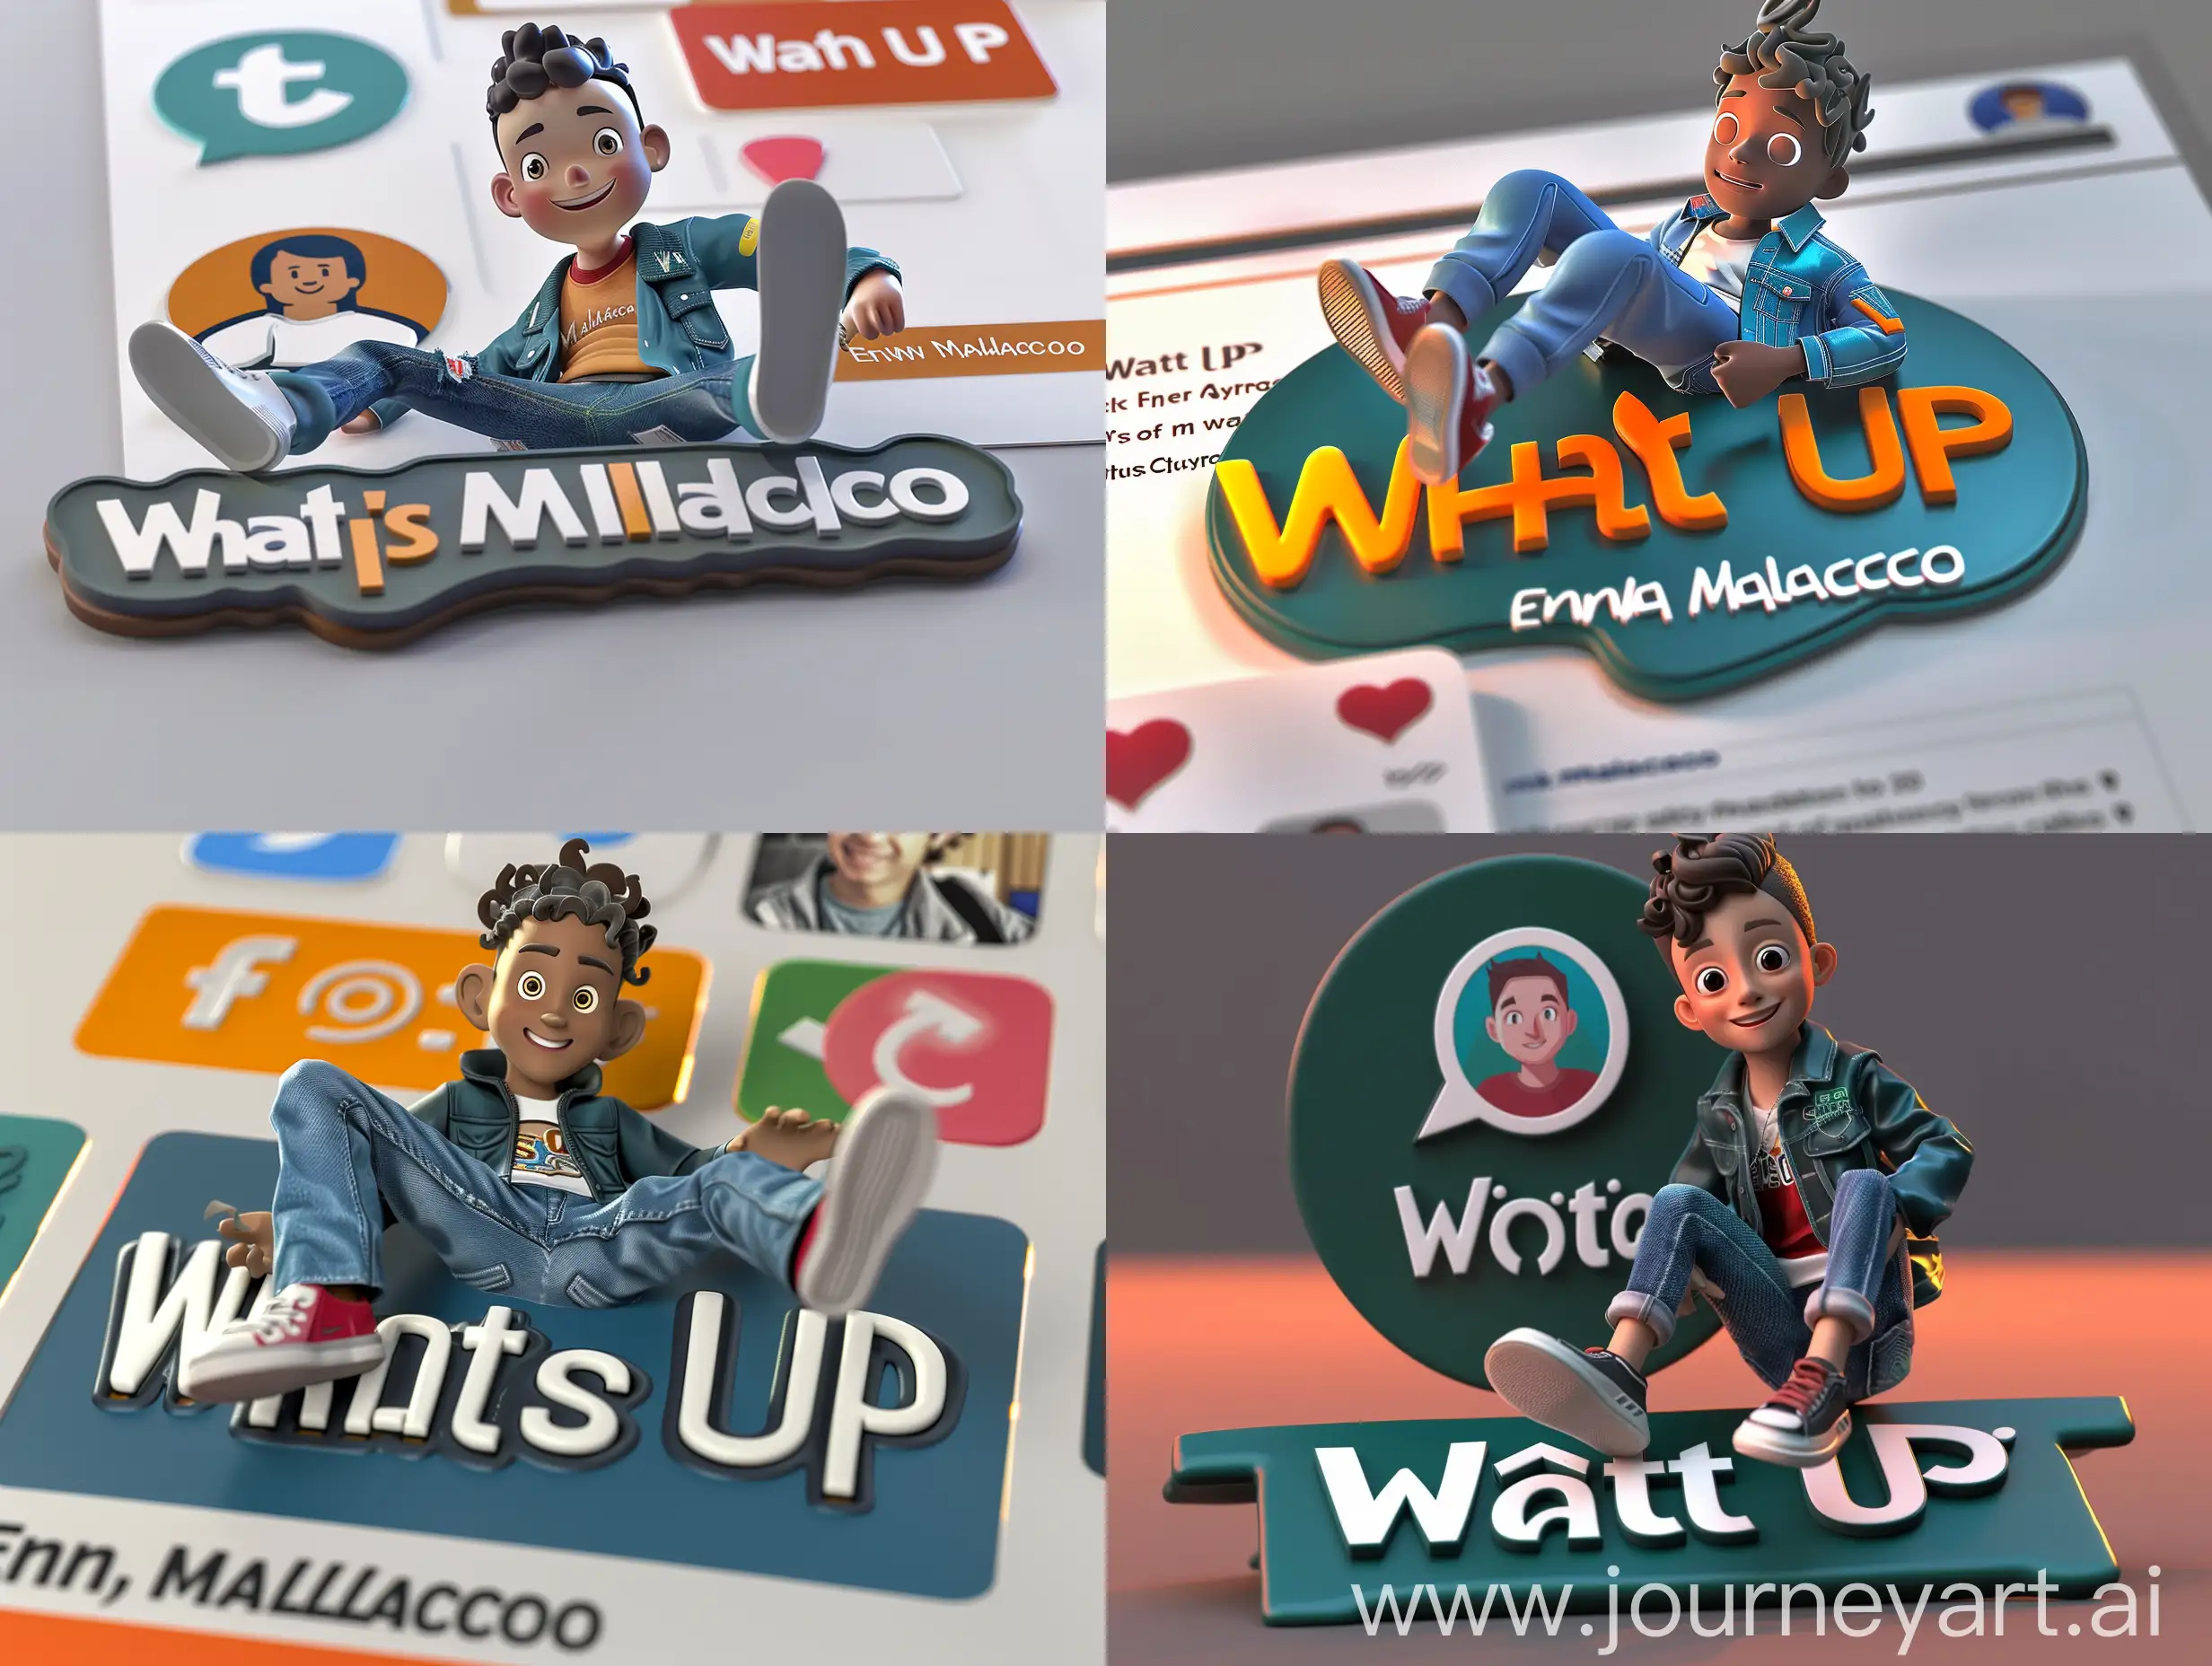 Create a 3D illustration of an animated character sitting casually on top of a social media logo "whats up". The character must wear casual modern clothing such as jeans jacket and sneakers shoes. The background of the image is a social media profile page with a user name "Ernie Malachico" and a profile picture that match.